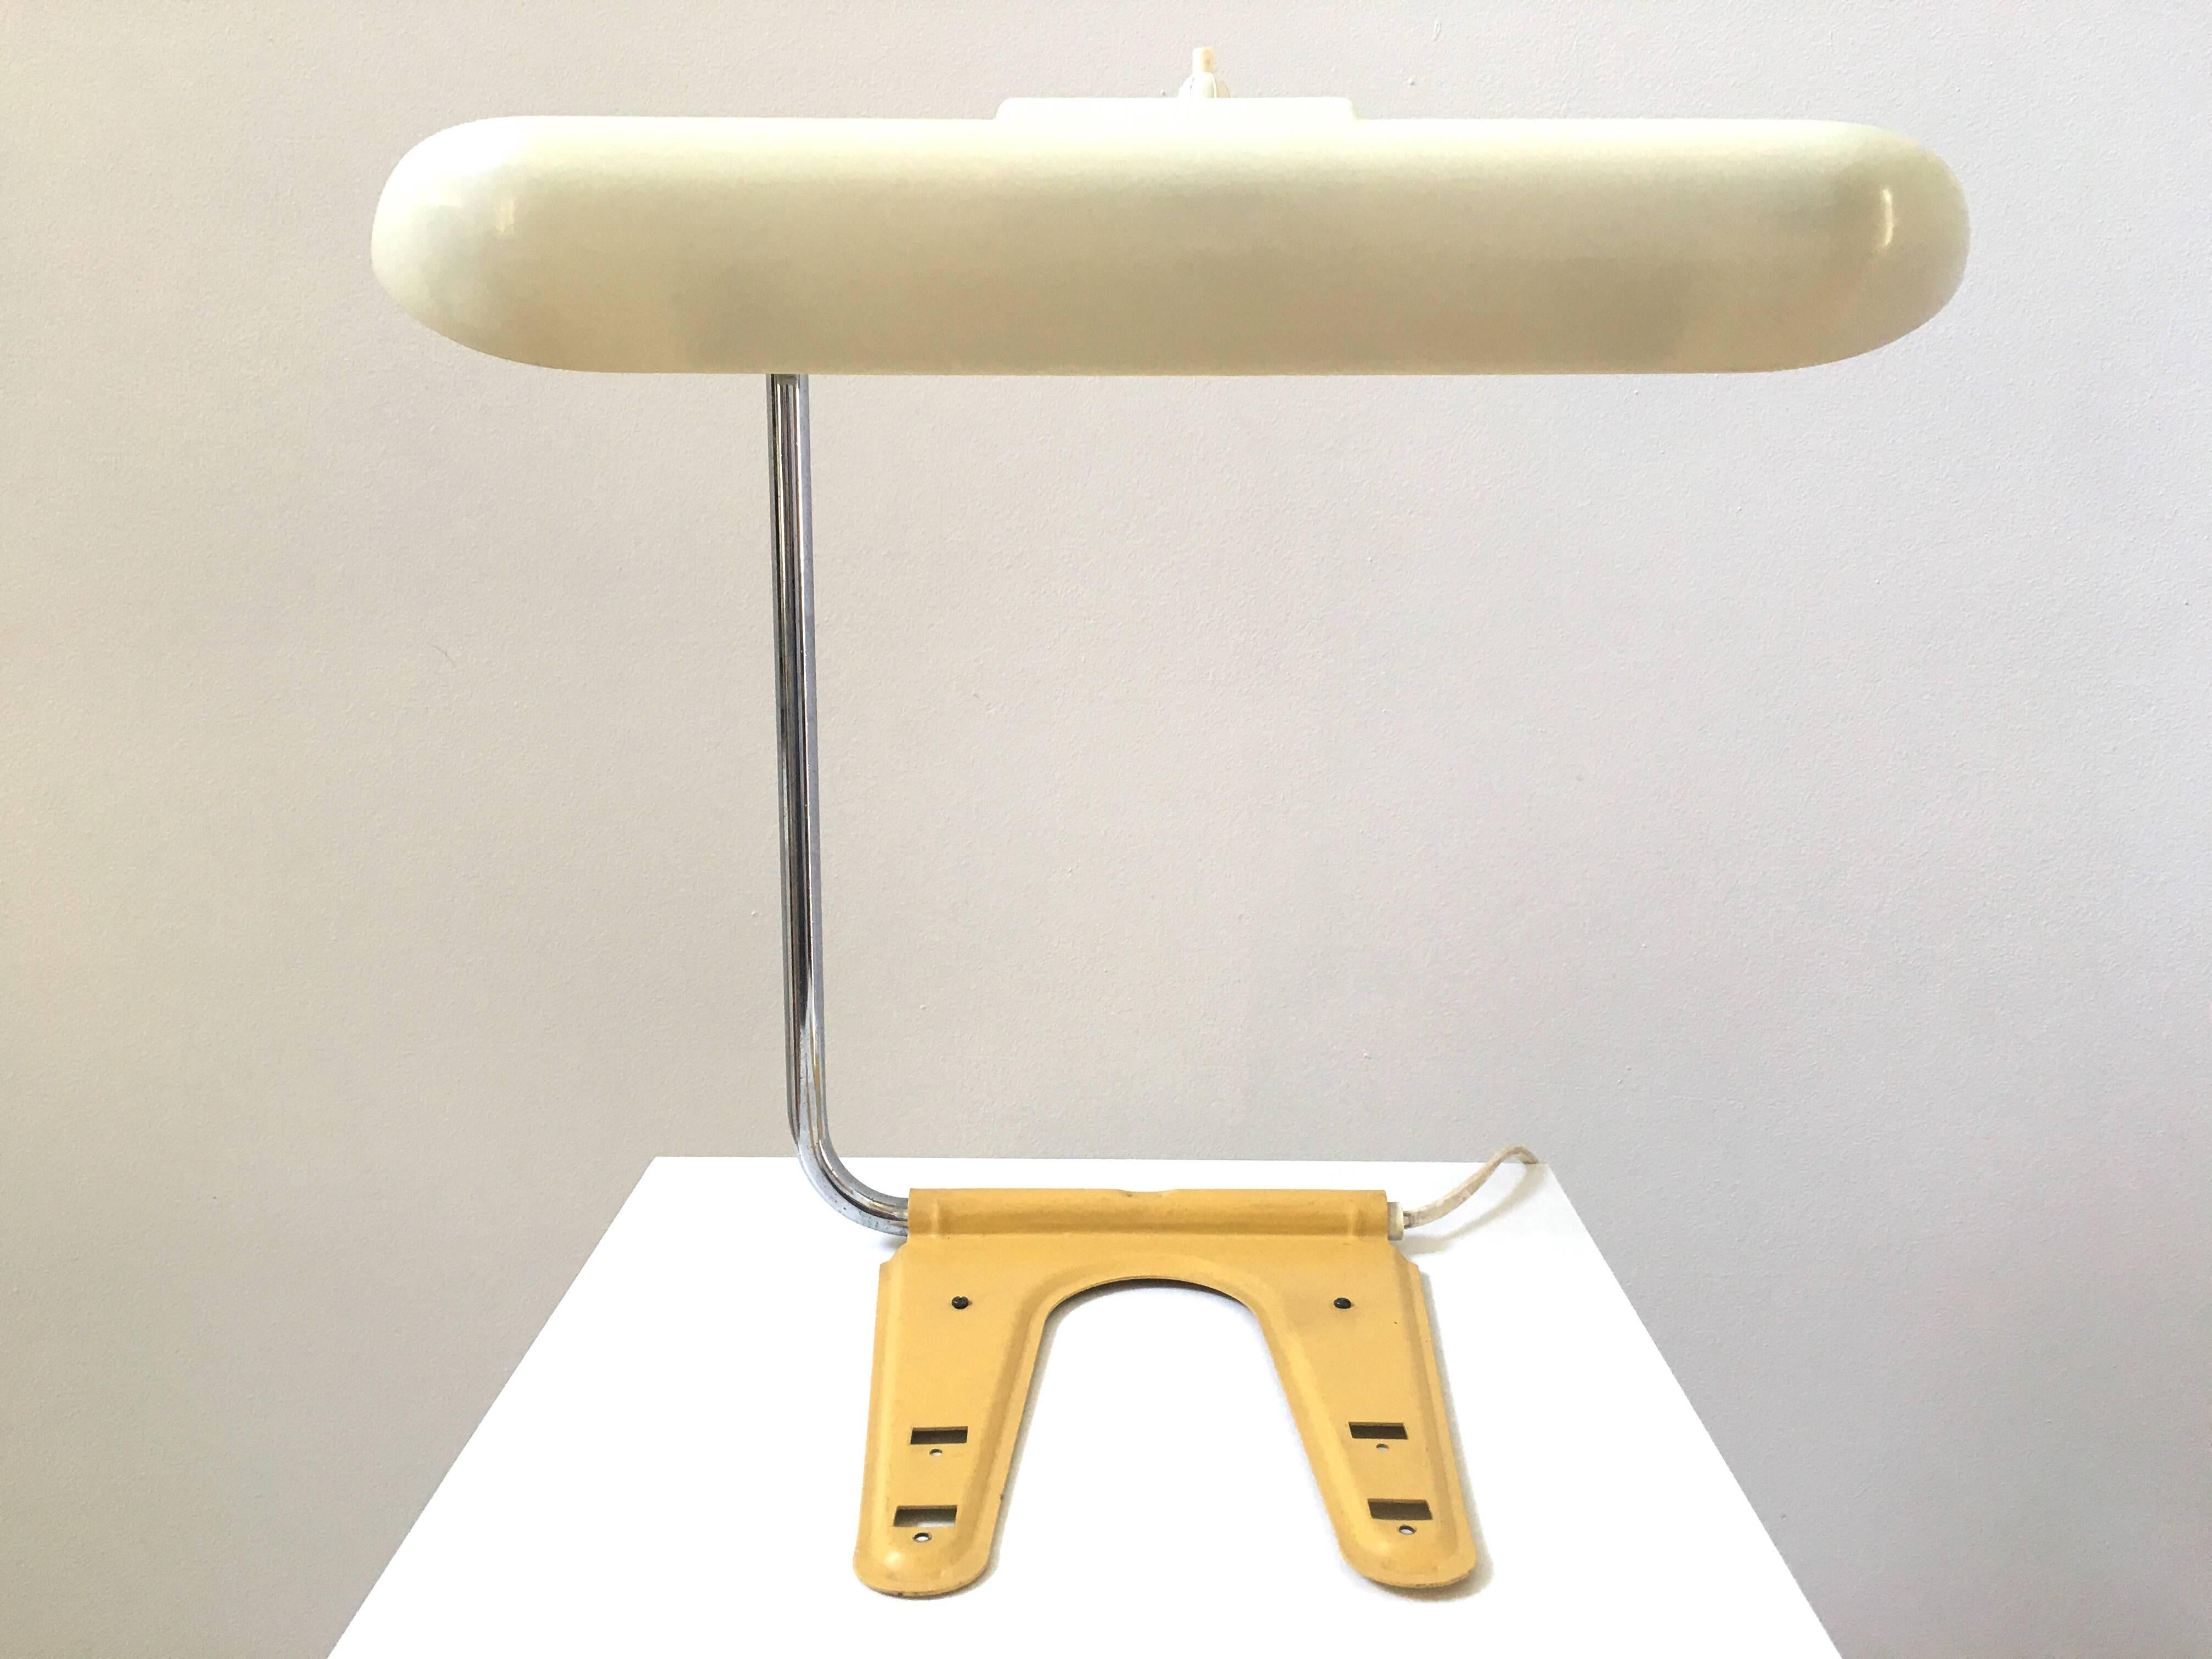 A French desk lamp in the style of Charlotte Perriand. Conceived to take very minimal space, the head of the lamp is adjustable.